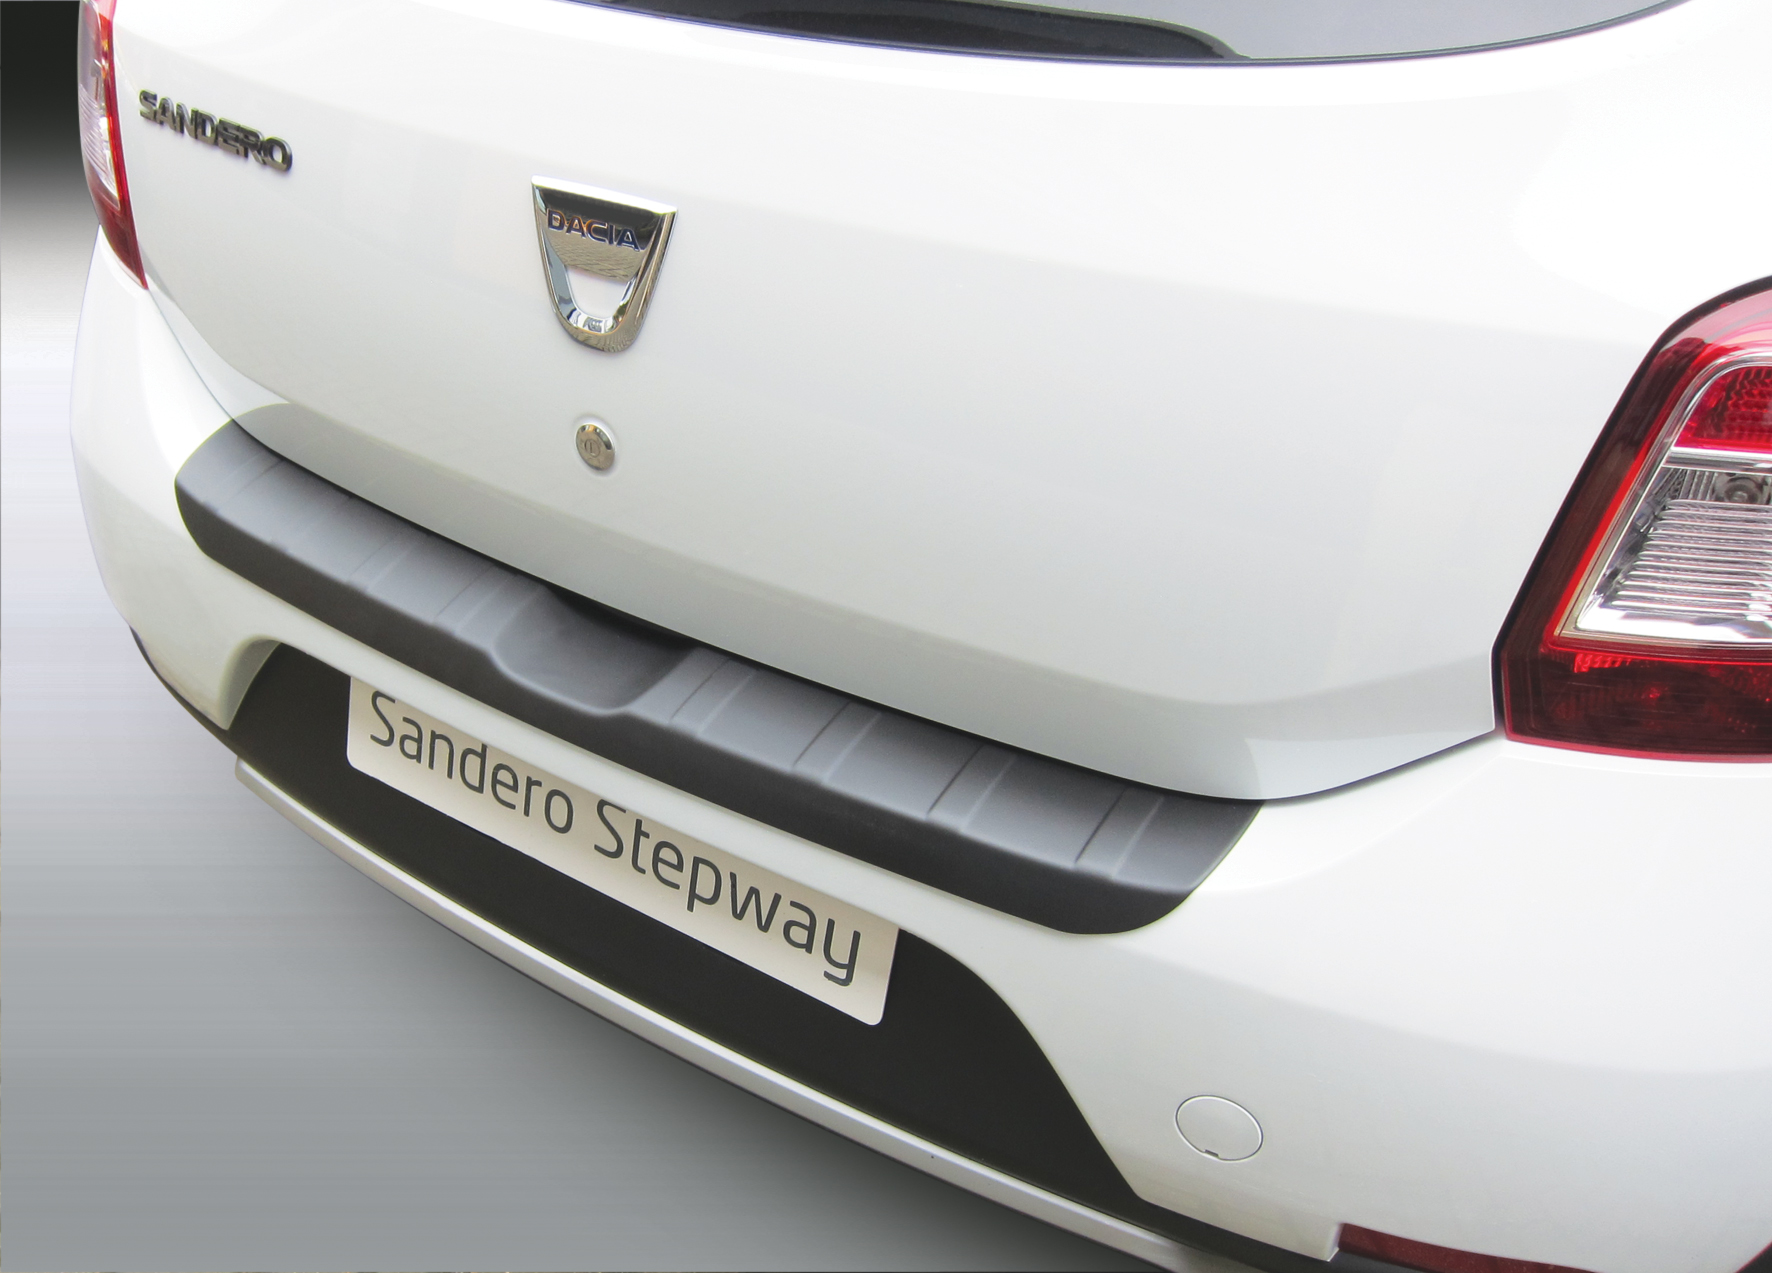 What is Front Guard and Rear Over Bumper for Dacia Sandero Stepway